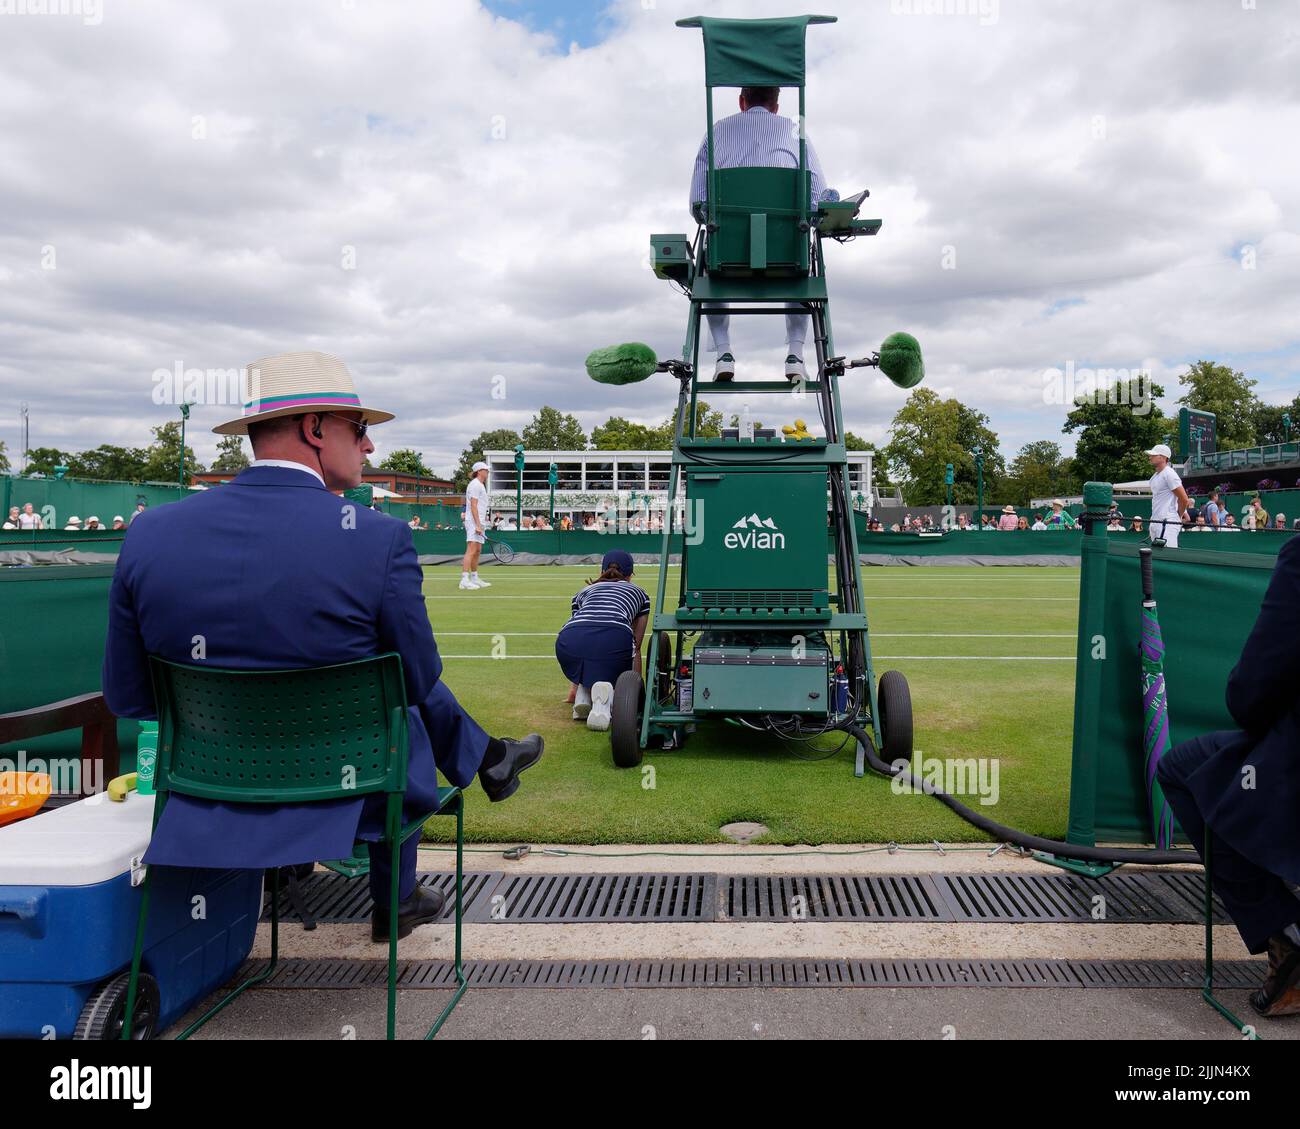 Wimbledon, Greater London, England, July 02 2022: Wimbledon Tennis Championship. Security man in a bowler hat observes as a game is in progress. Stock Photo